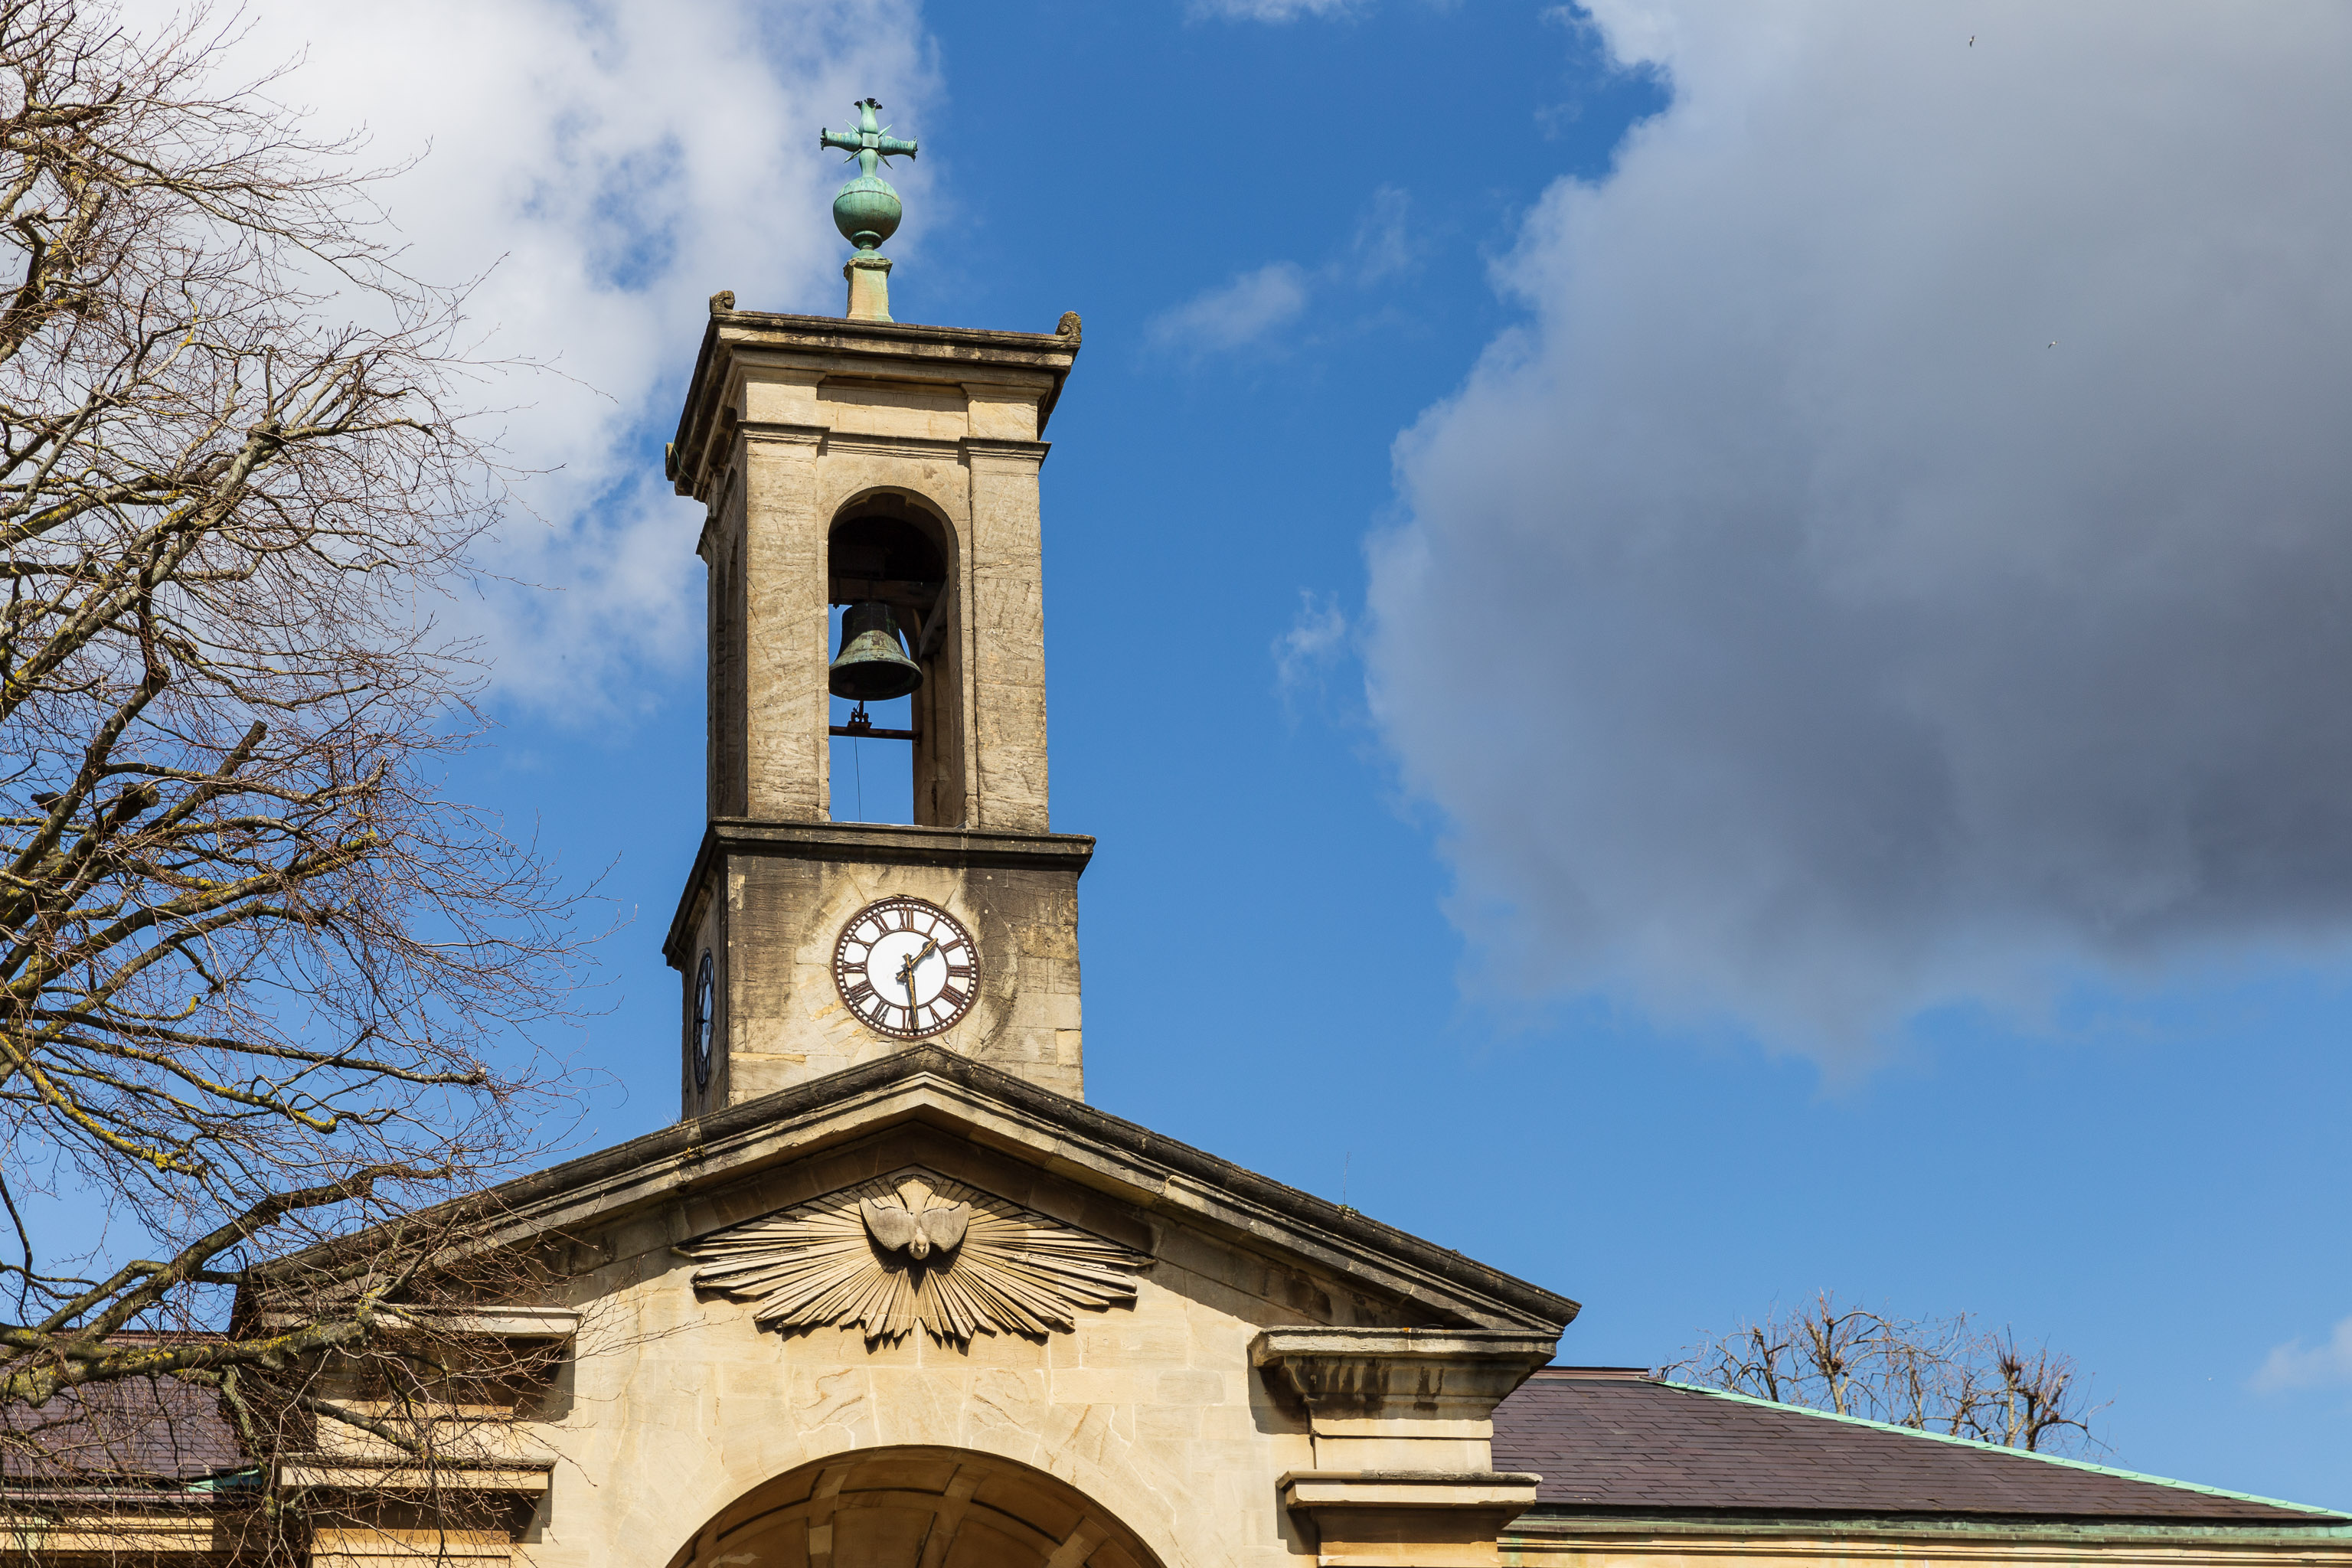 Last Shot
And we'll end on a high note, as Holy Trinity's belfry was looking particularly eye-catching today. The clock's right, too, which is rare in a publ...